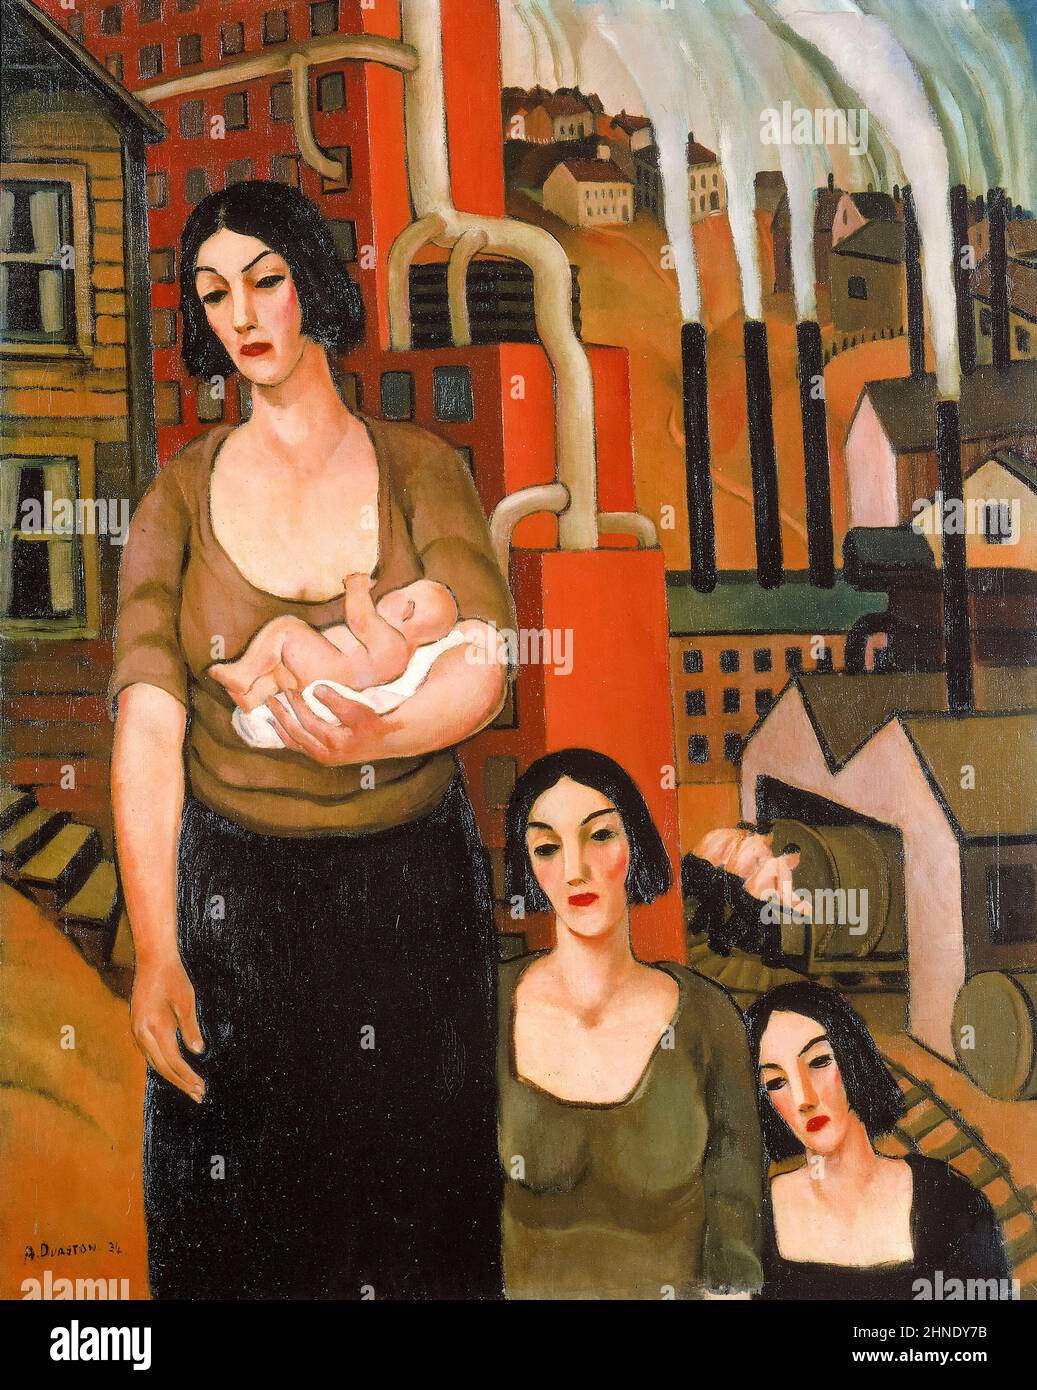 Arthur Durston, Industry (Three women, one holding a baby in front of a factory), painting, oil on canvas, 1934 New Deal art Stock Photo